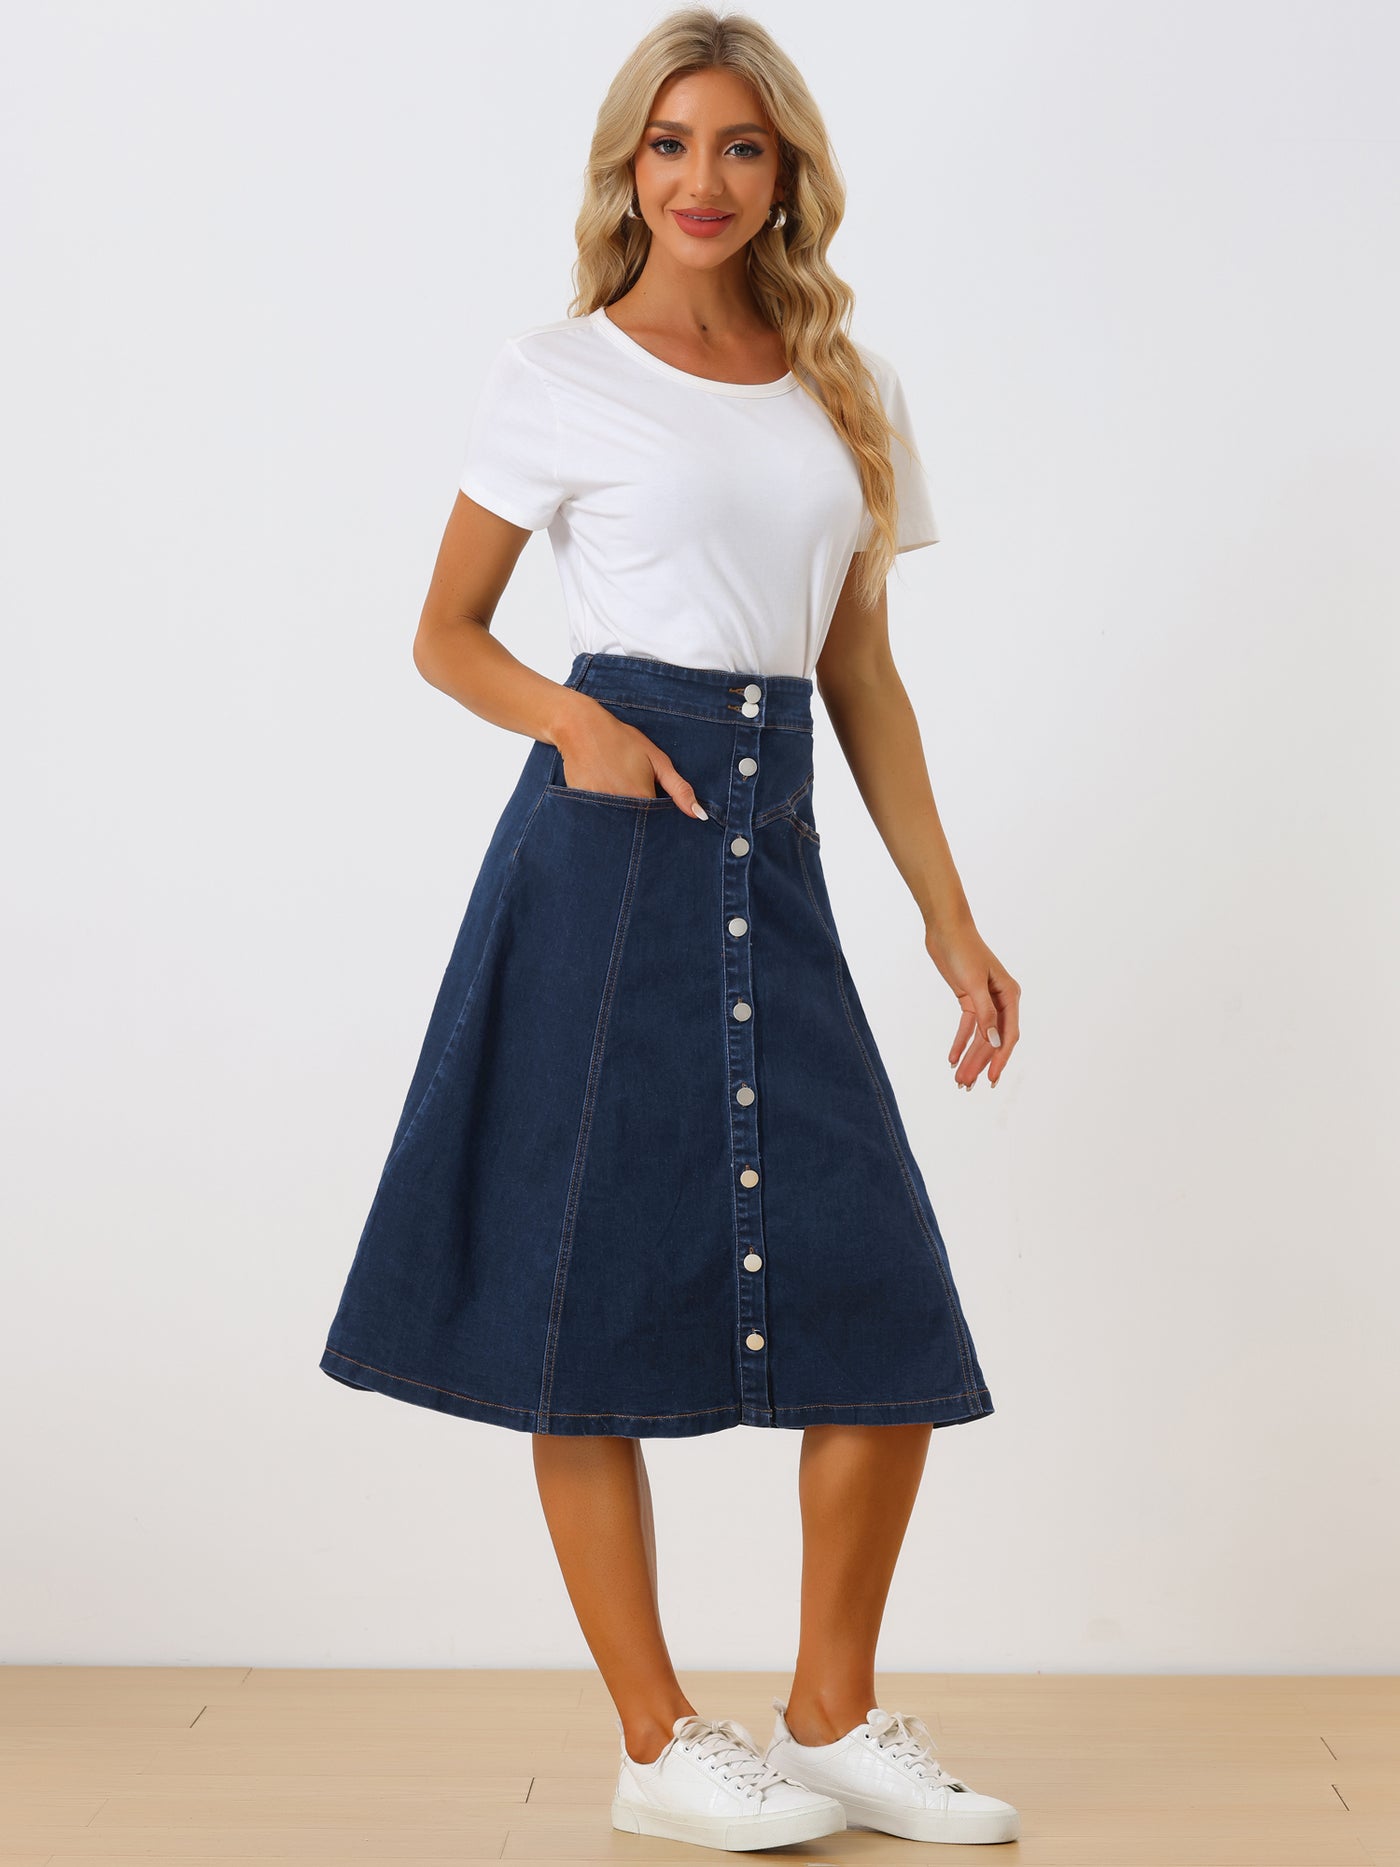 Allegra K Womens' Stretchy High Waist Buttons Front A-Line Flowy Midi Skirts with Pockets